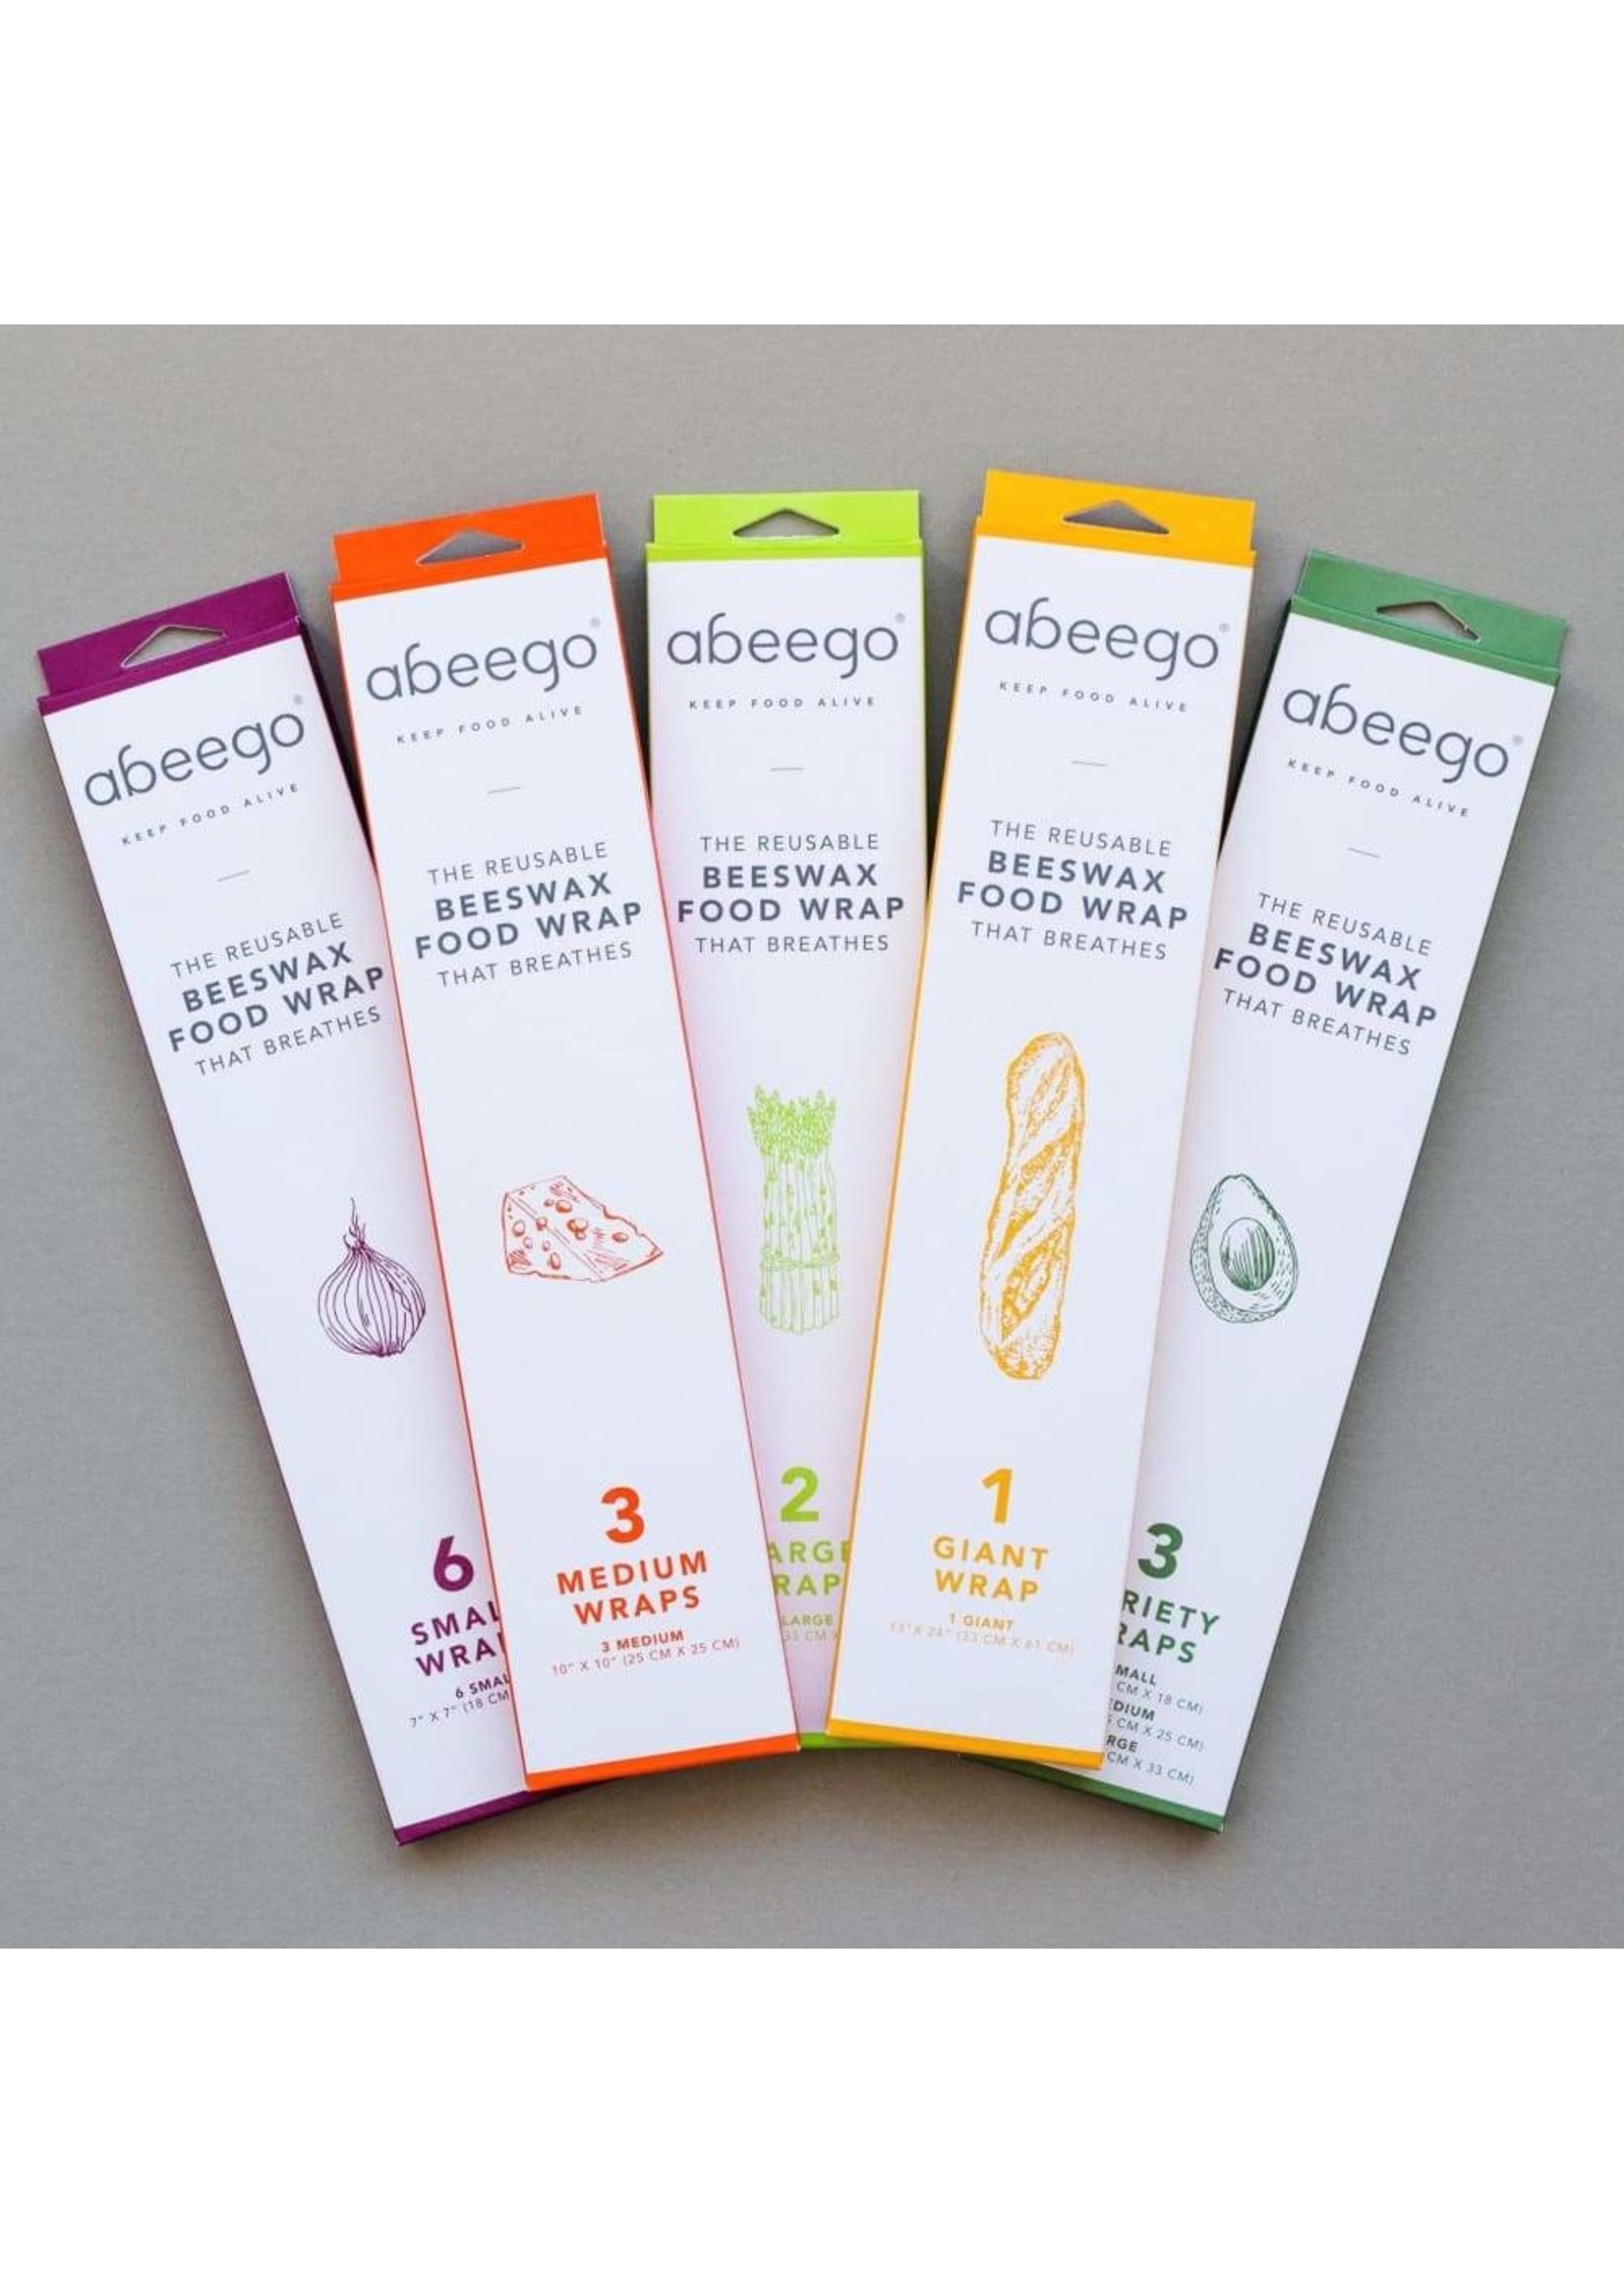 Abeego Beeswax Food Wrap Abeego-Variety Pack